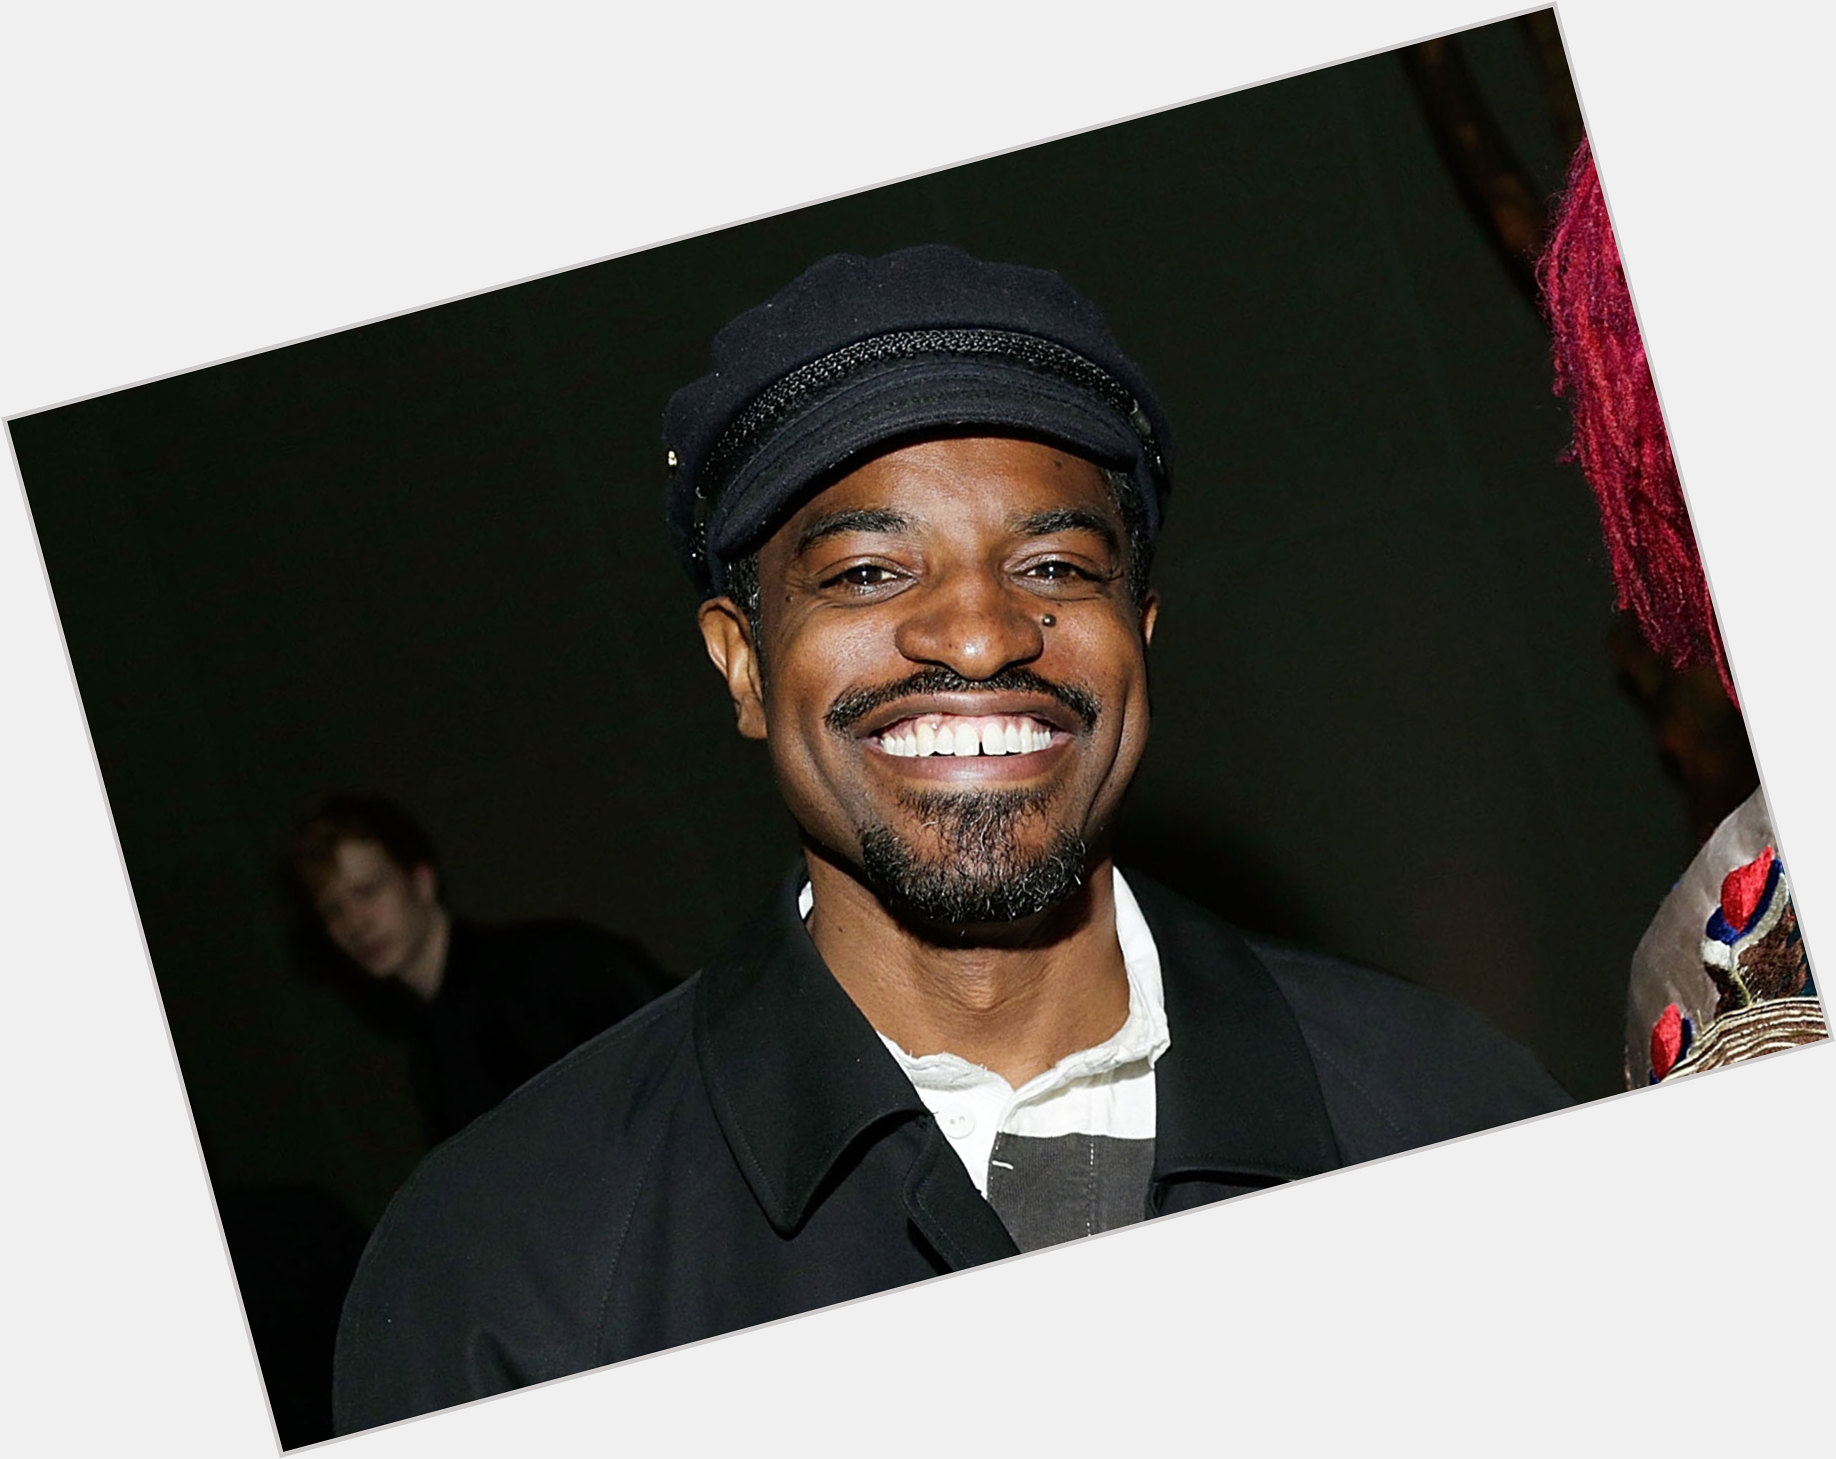 Https://fanpagepress.net/m/A/Andre 3000 New Pic 1